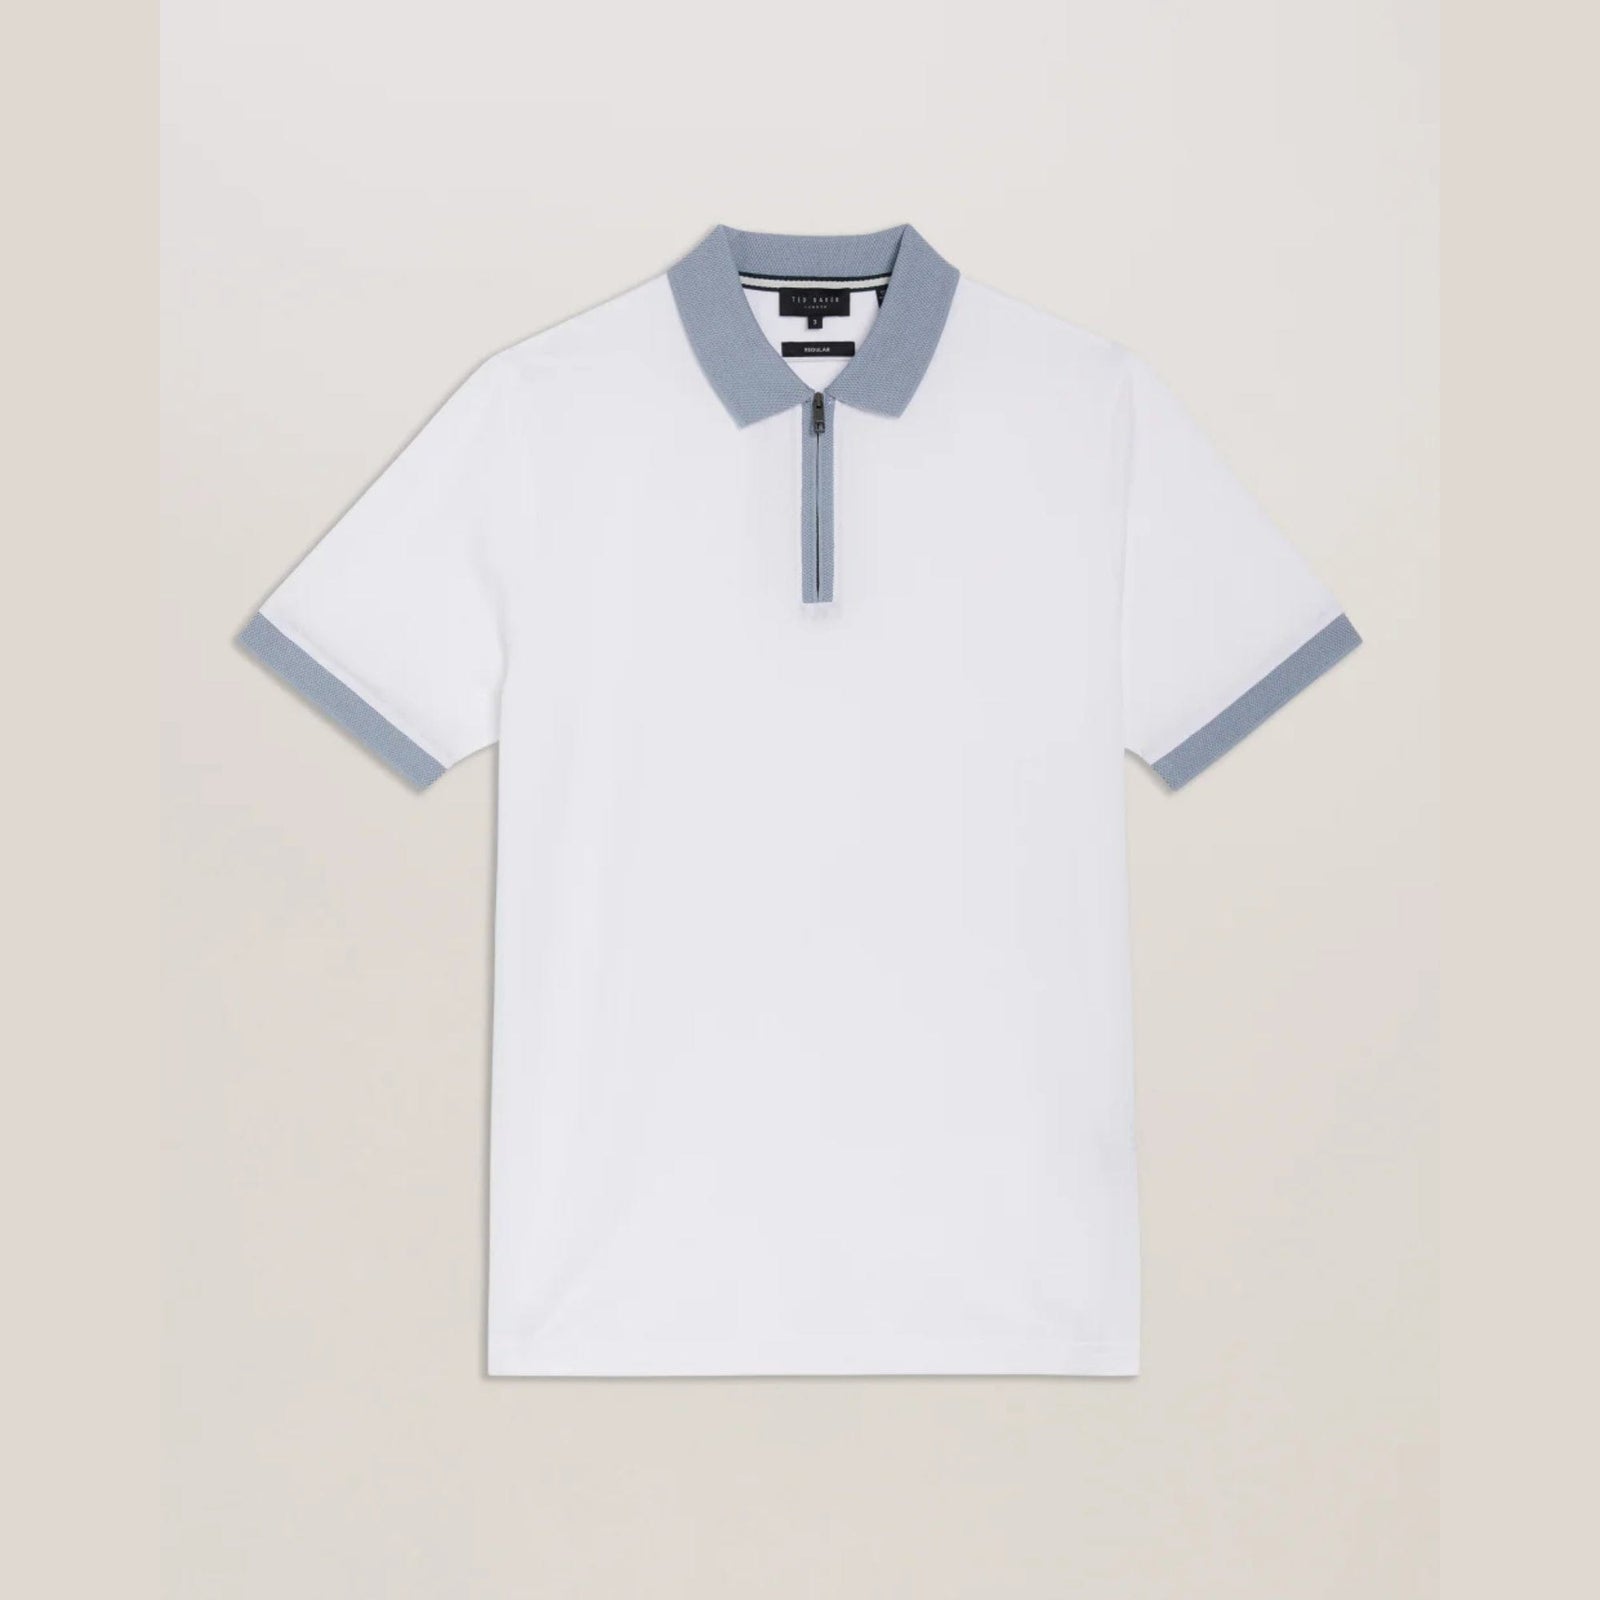 Ted Baker Arnival Textured Knit Contrast Trim Polo Shirt in White